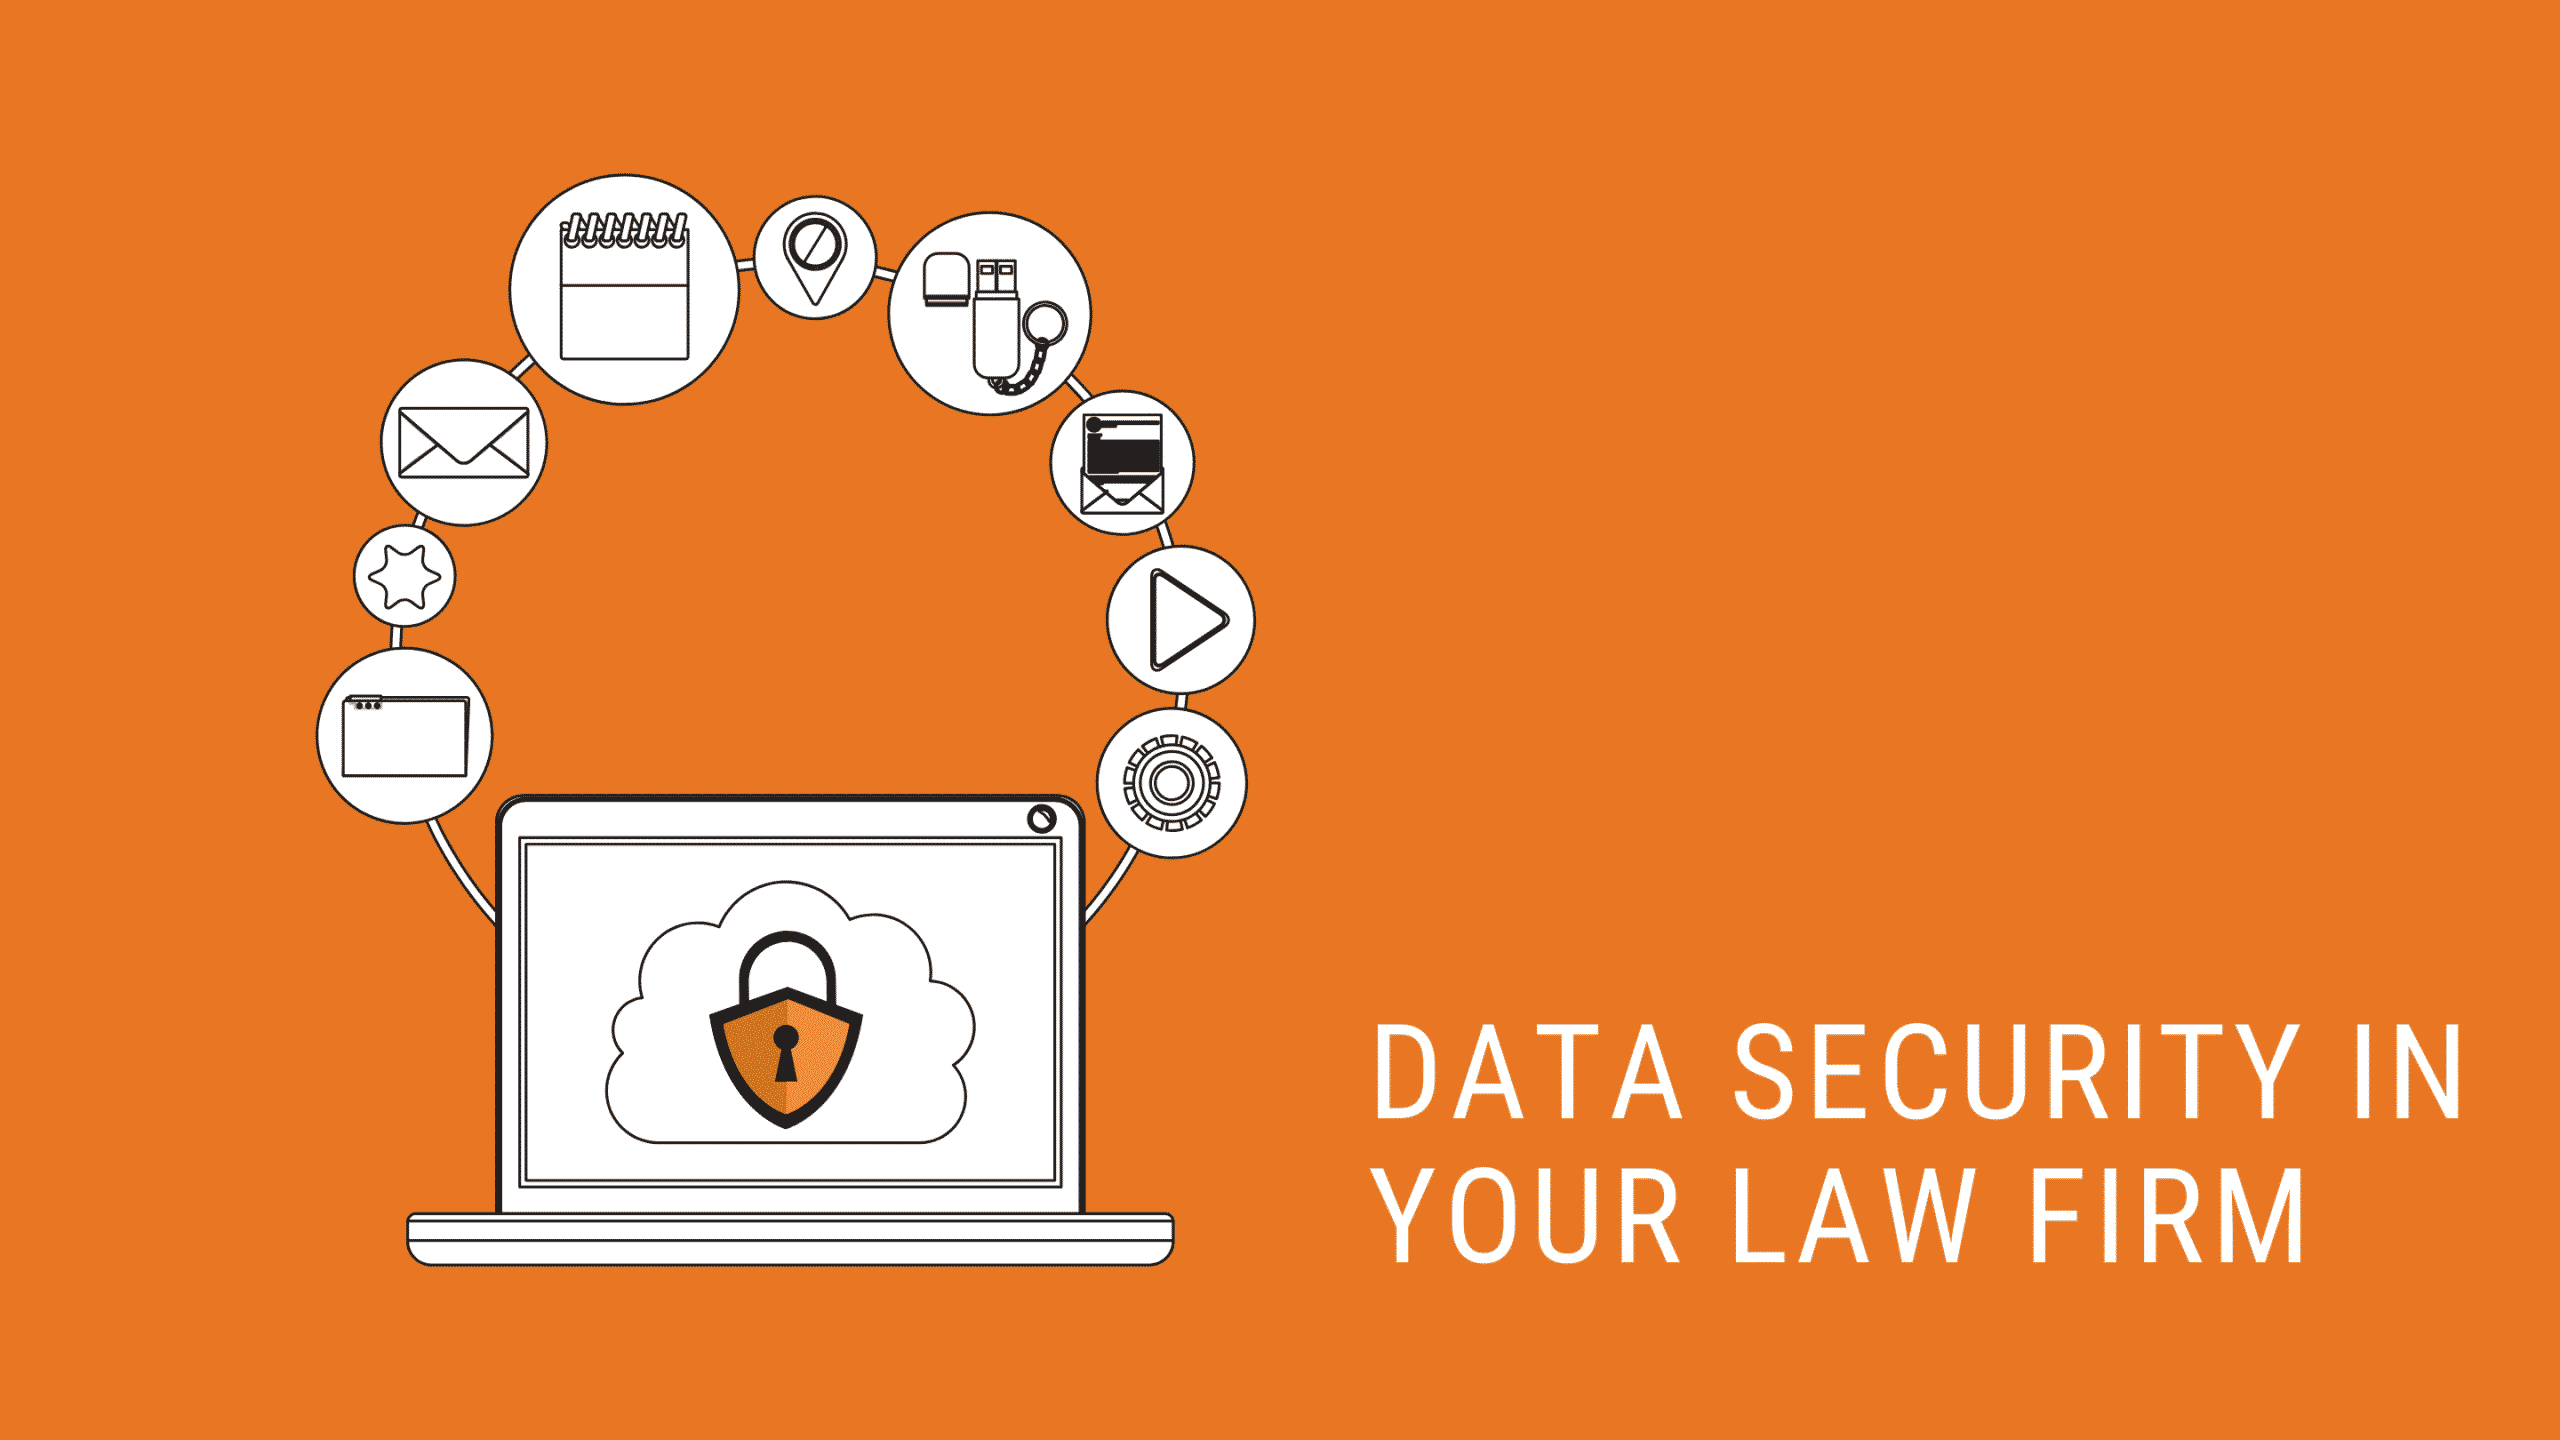 Security in Law firm - cover image